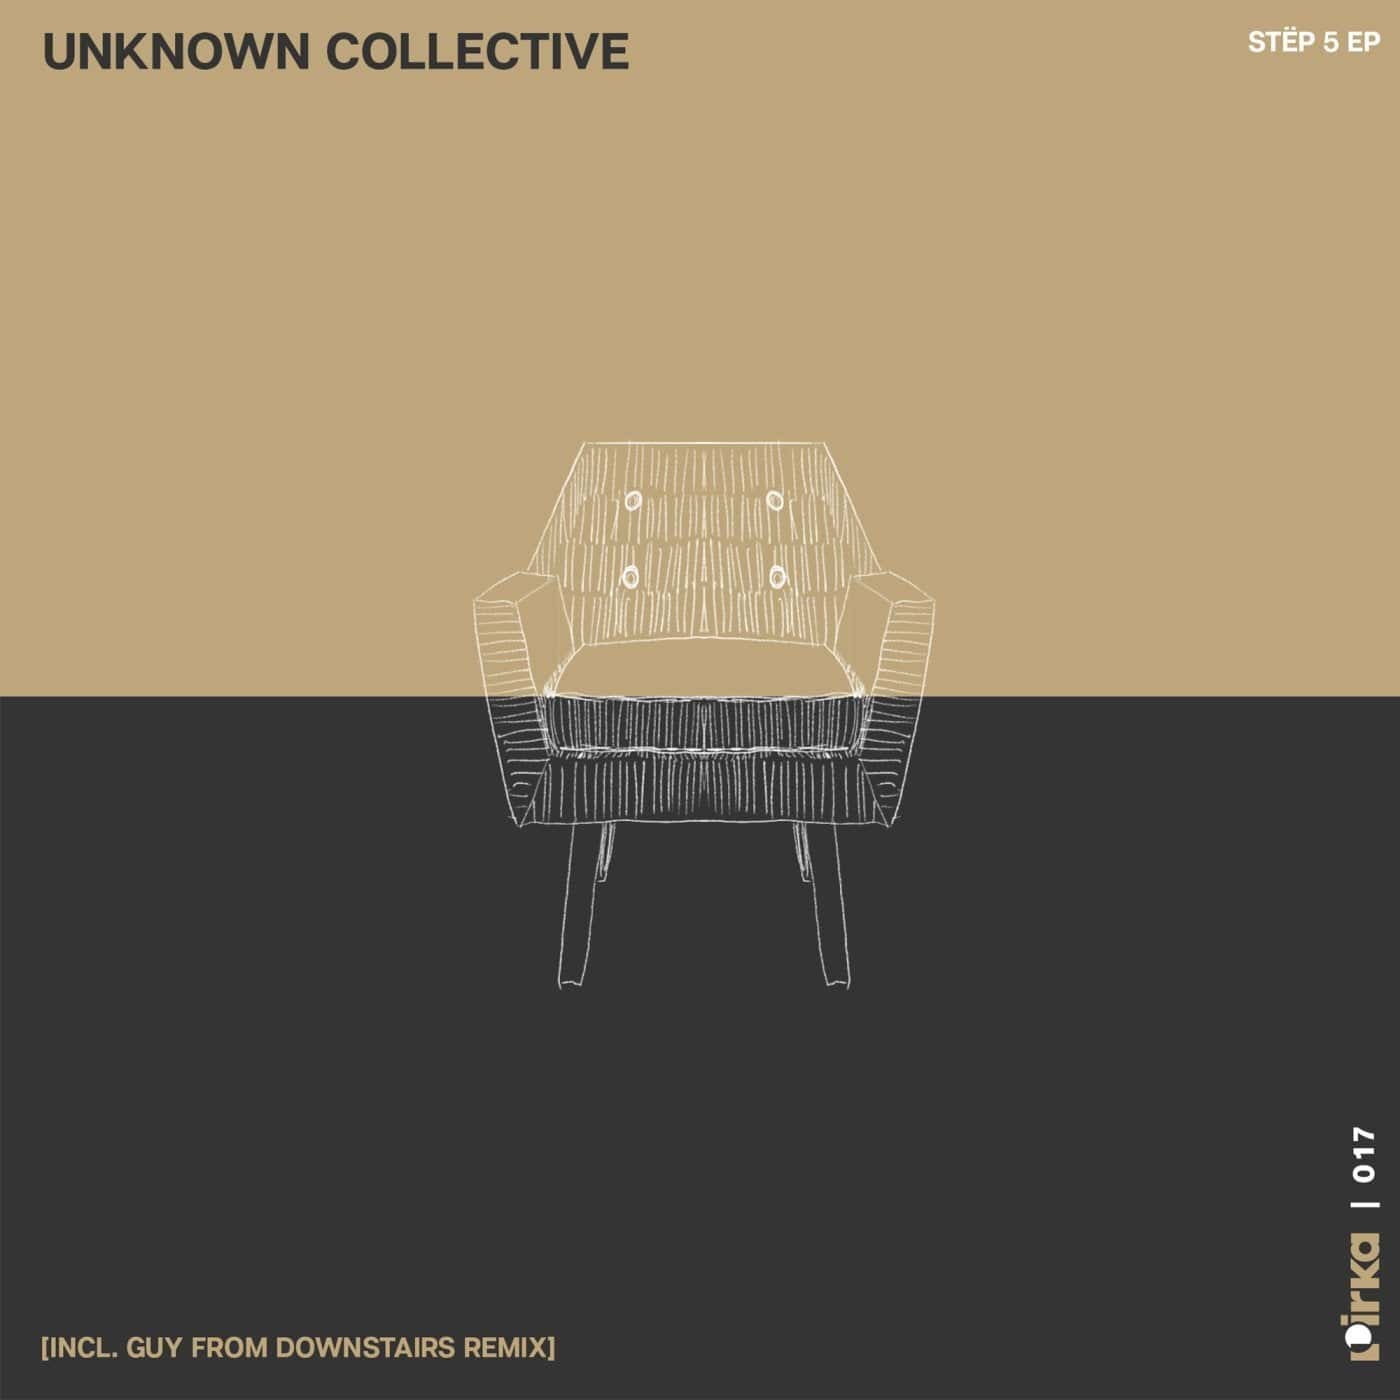 image cover: Unknown Collective - Stëp 5 EP / PRK017